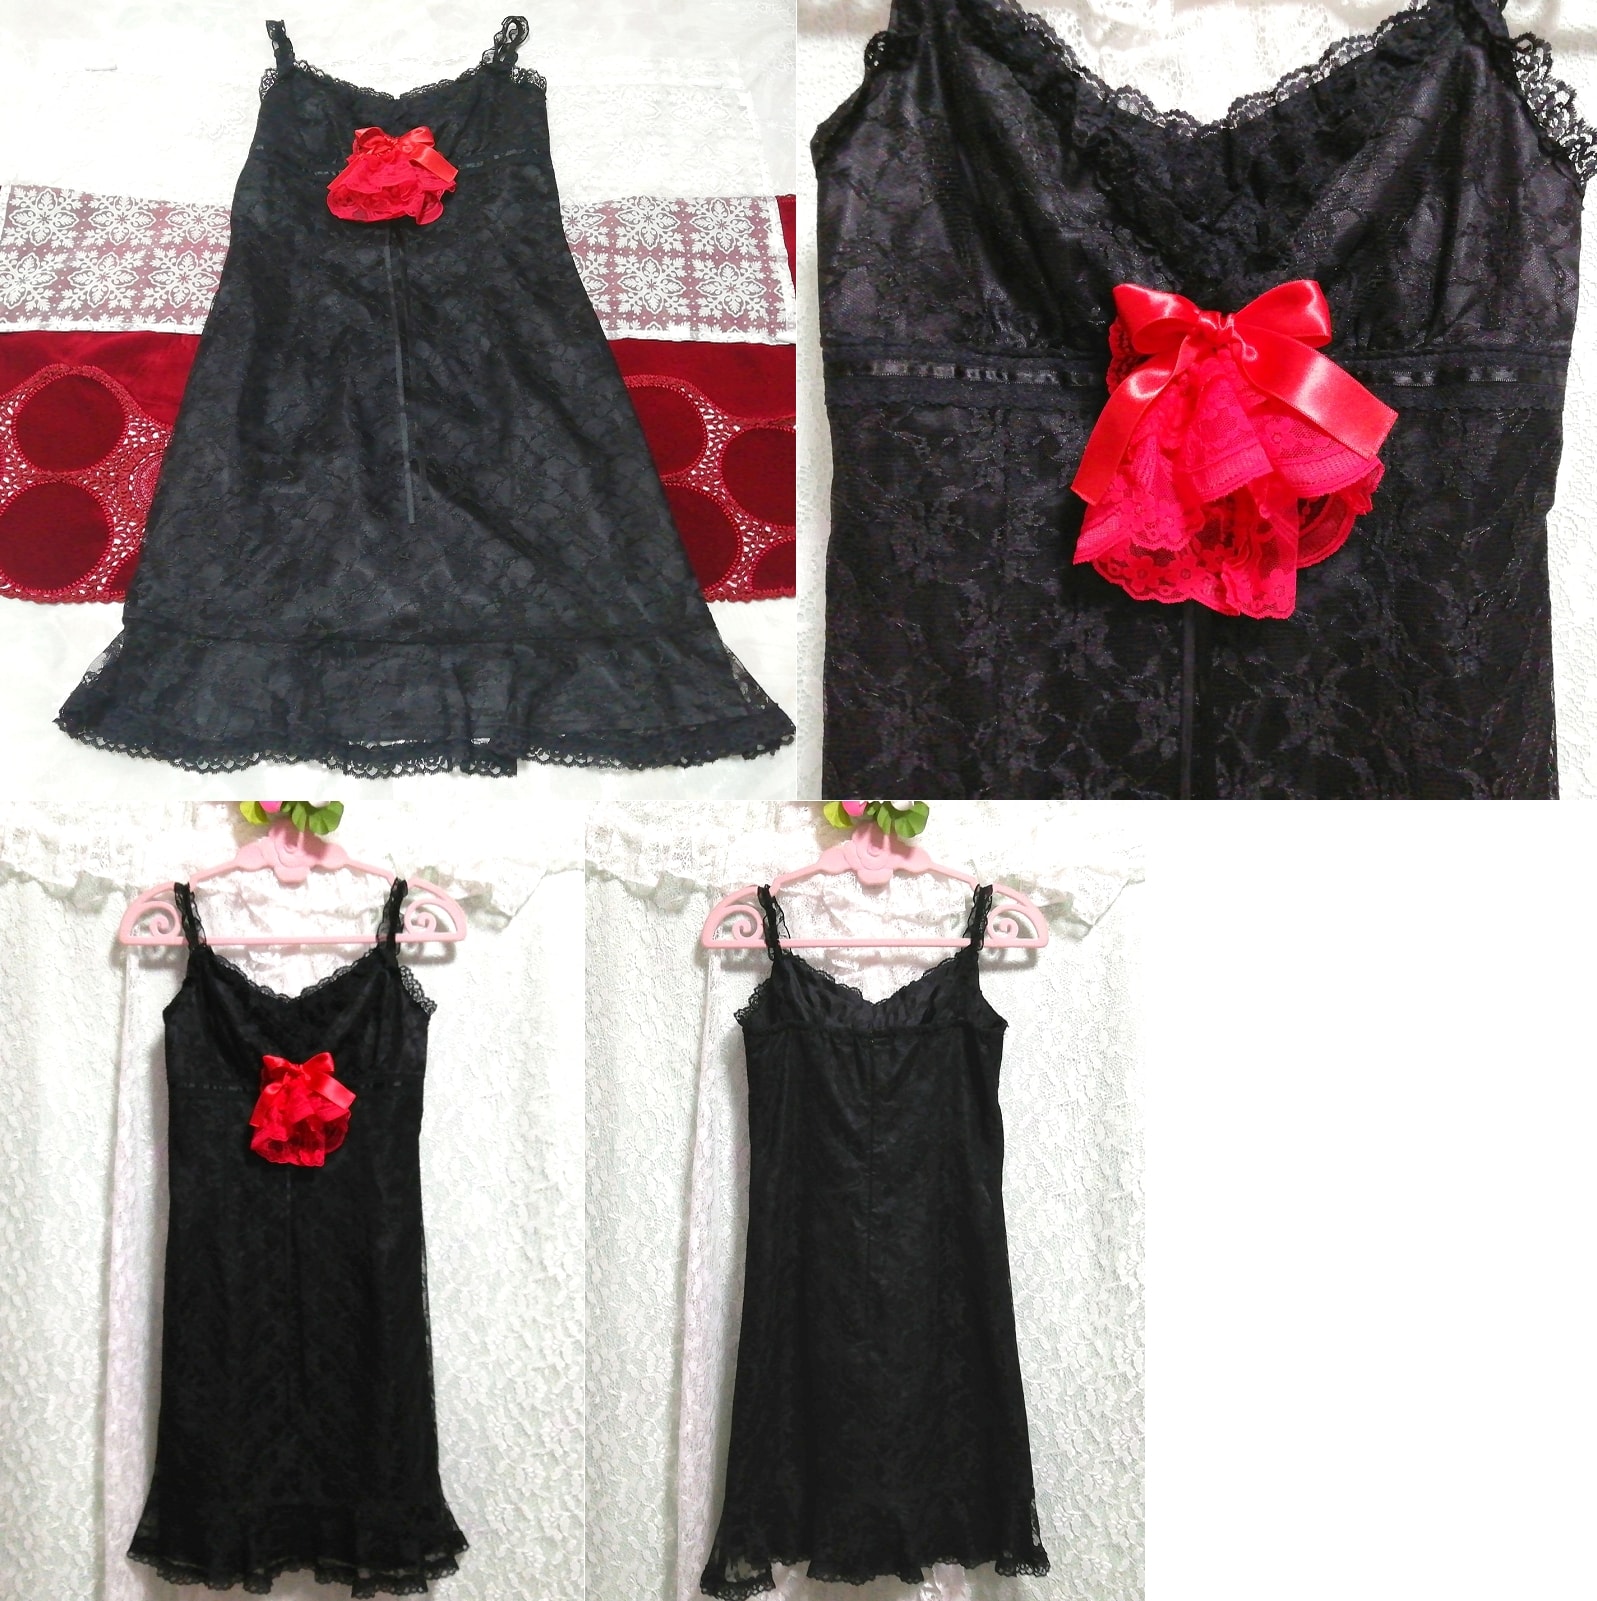 Red rose corsage black floral lace camisole negligee nightgown dress, fashion, ladies' fashion, camisole